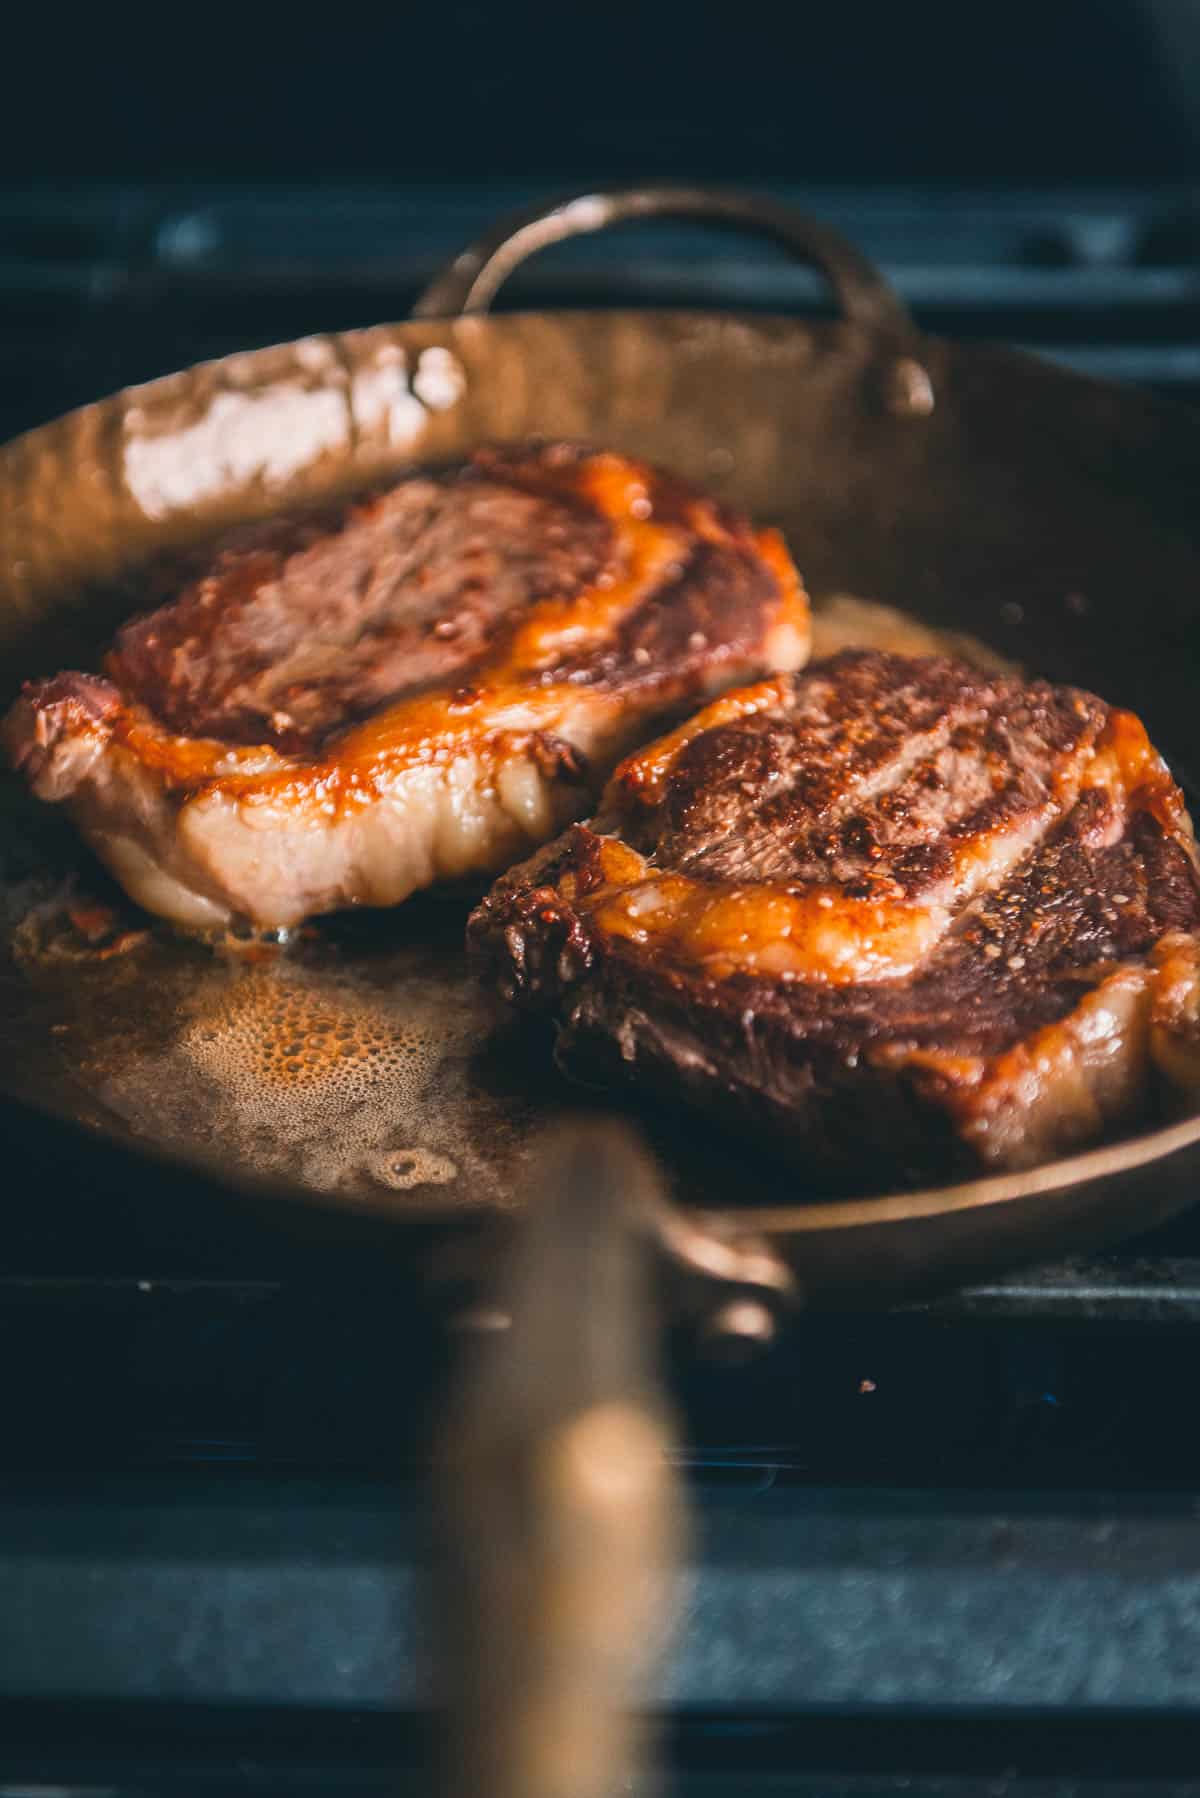 Two steaks in a frying pan on a stove.